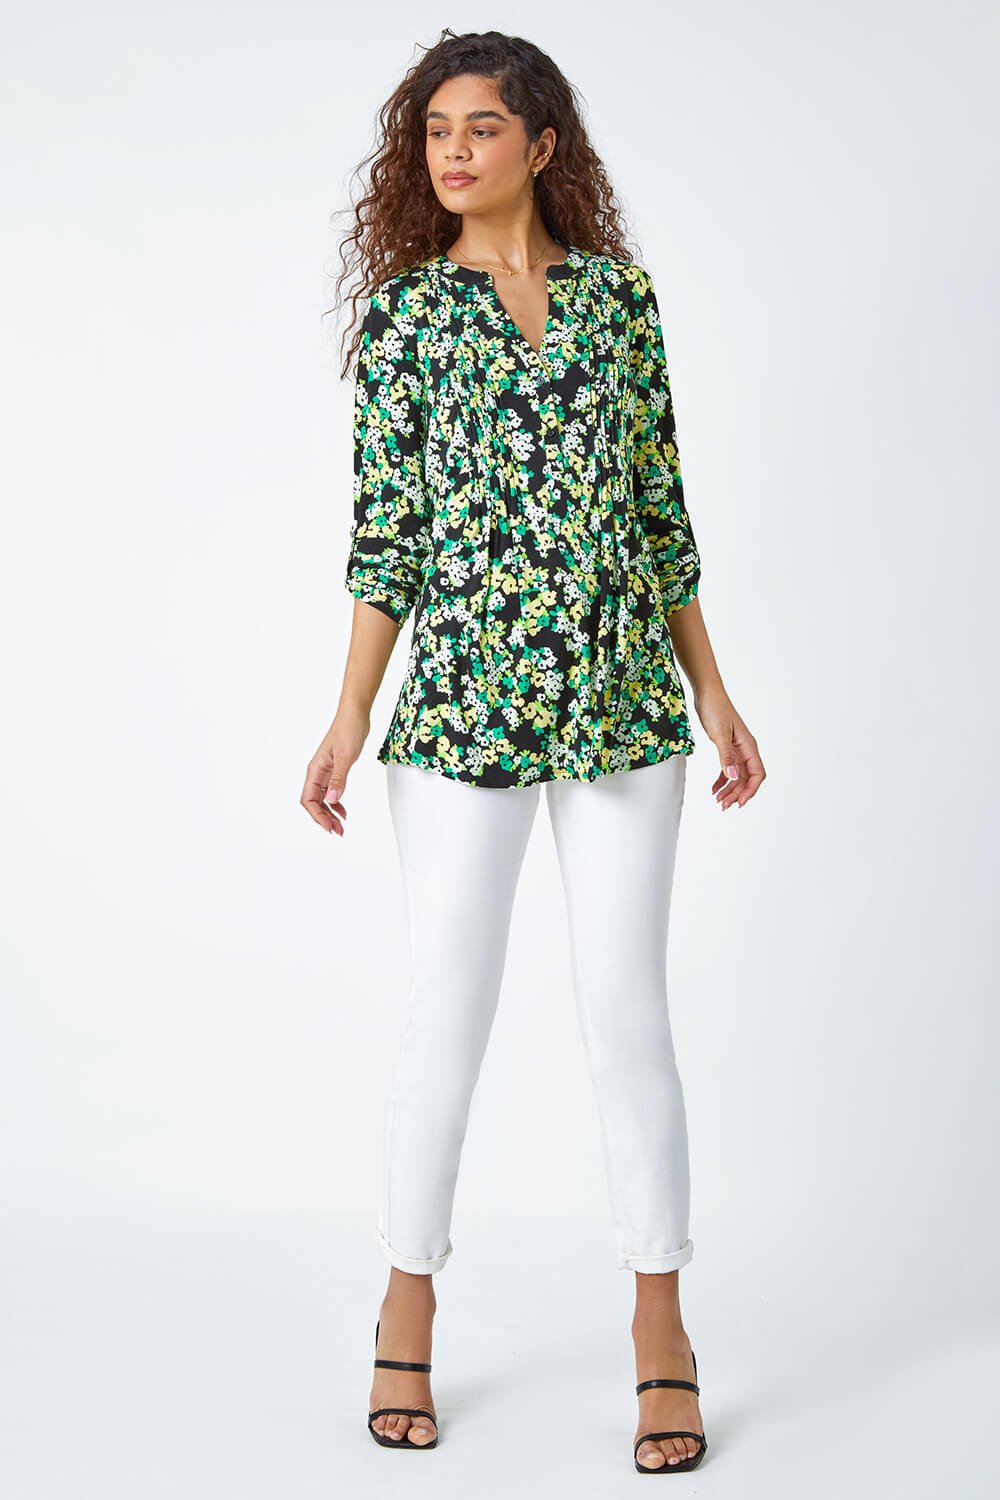 Green Floral Print Pintuck Stretch Top, Image 2 of 6